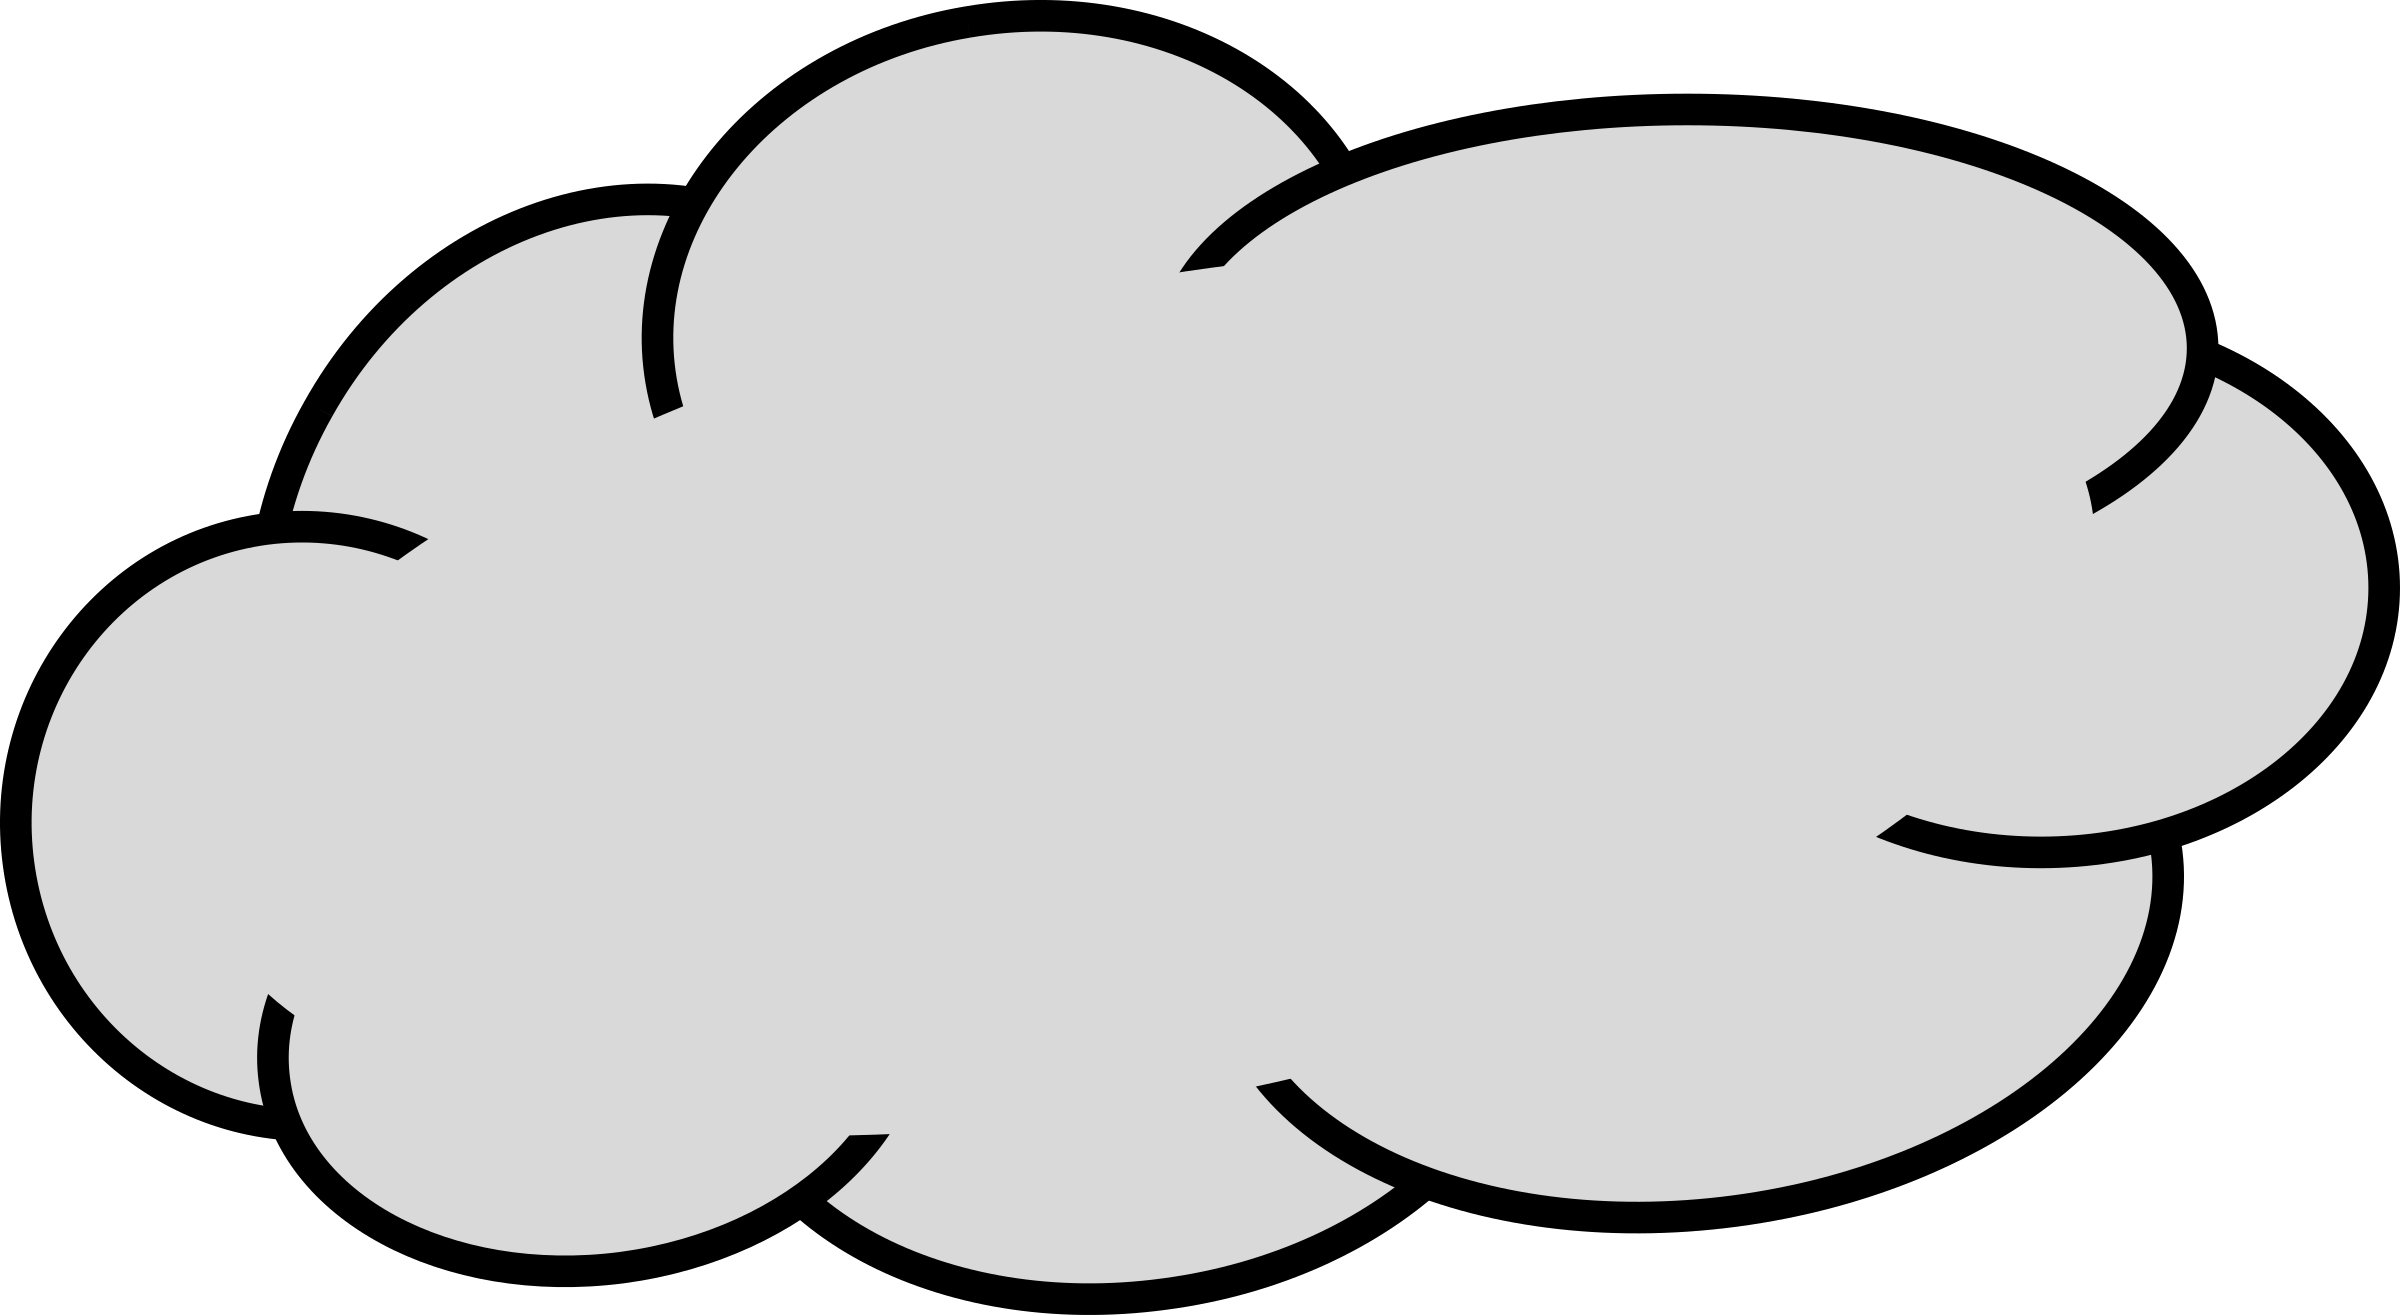 A White Cloud With Black Border